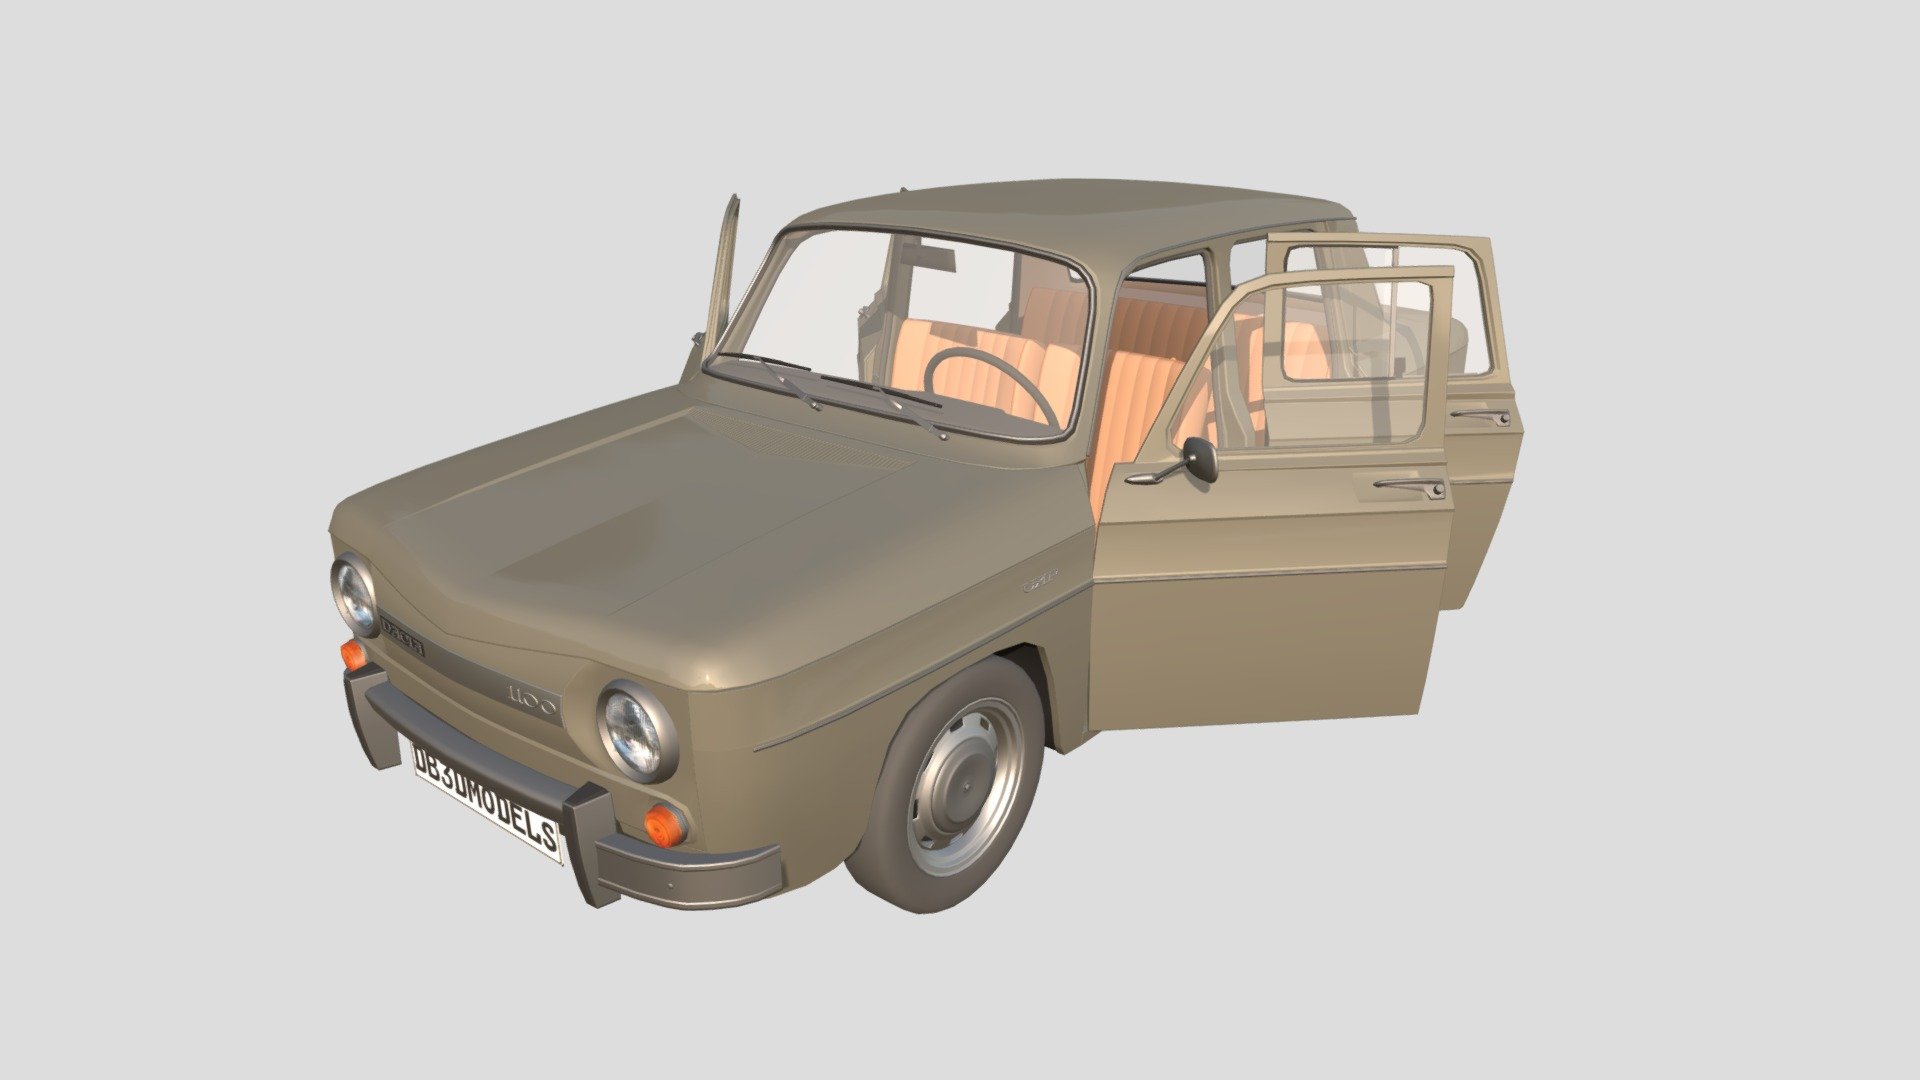 Highly detailed Dacia 1100 with a detailed interior 3d model rendered with Cycles in Blender, as per seen on attached images. 
The 3d model is scaled to original size in Blender.

File formats:
-.blend, rendered with cycles, as seen in the images;
-.blend, open, rendered with cycles, as seen in the images;
-.obj, with materials applied;
-.obj, open, with materials applied;
-.dae, with materials applied;
-.dae, open, with materials applied;
-.fbx, with materials applied;
-.fbx, open, with materials applied;
-.stl;
-.stl, open;

Files come named appropriately and split by file format.

3D Software:
The 3D model was originally created in Blender 2.8 and rendered with Cycles.

Materials and textures:
The models have materials applied in all formats, and are ready to import and render.
The models come with two png textures, one for the car lights, interior details, and one for the number plates.

General:
The models are built mostly out of quads and are subdivisable 3d model